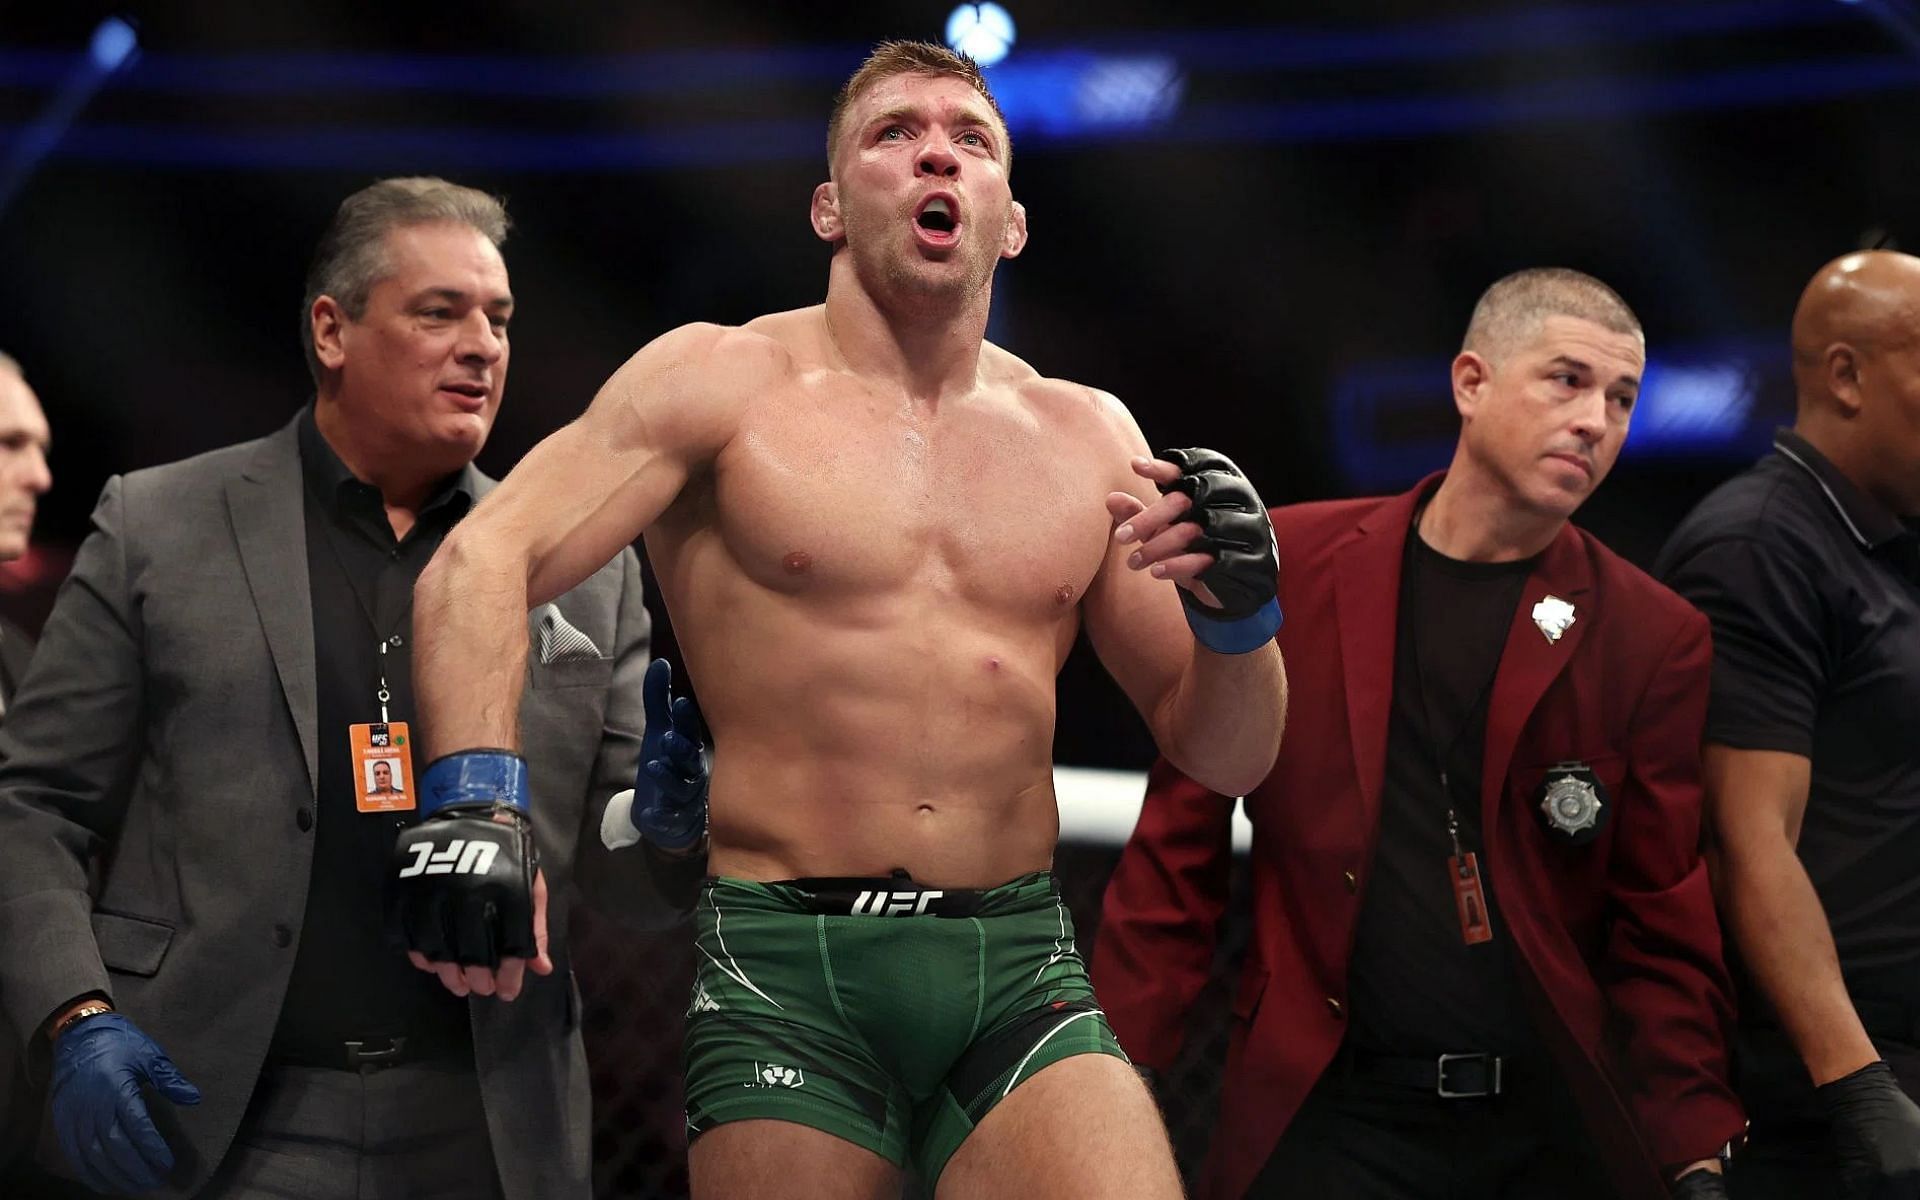 UFC title challenger Dricus du Plessis (pictured) had his eyes on on middleweight gold from his first fight in the promotion [Image Courtesy: @GettyImages]